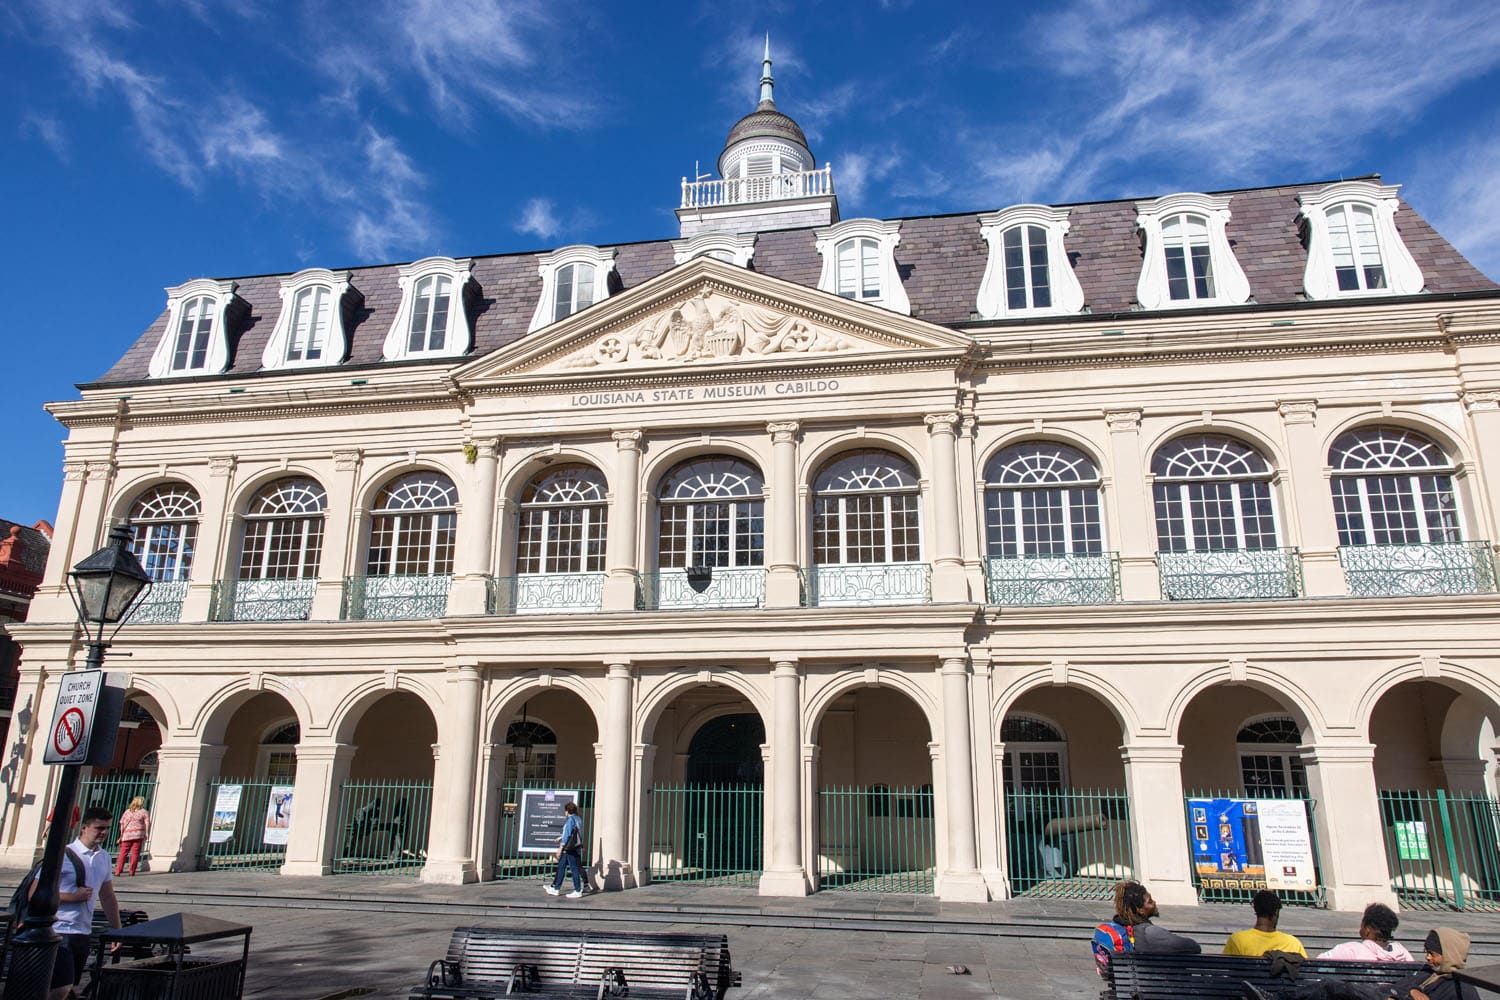 Cabildo | Best Things to Do in New Orleans